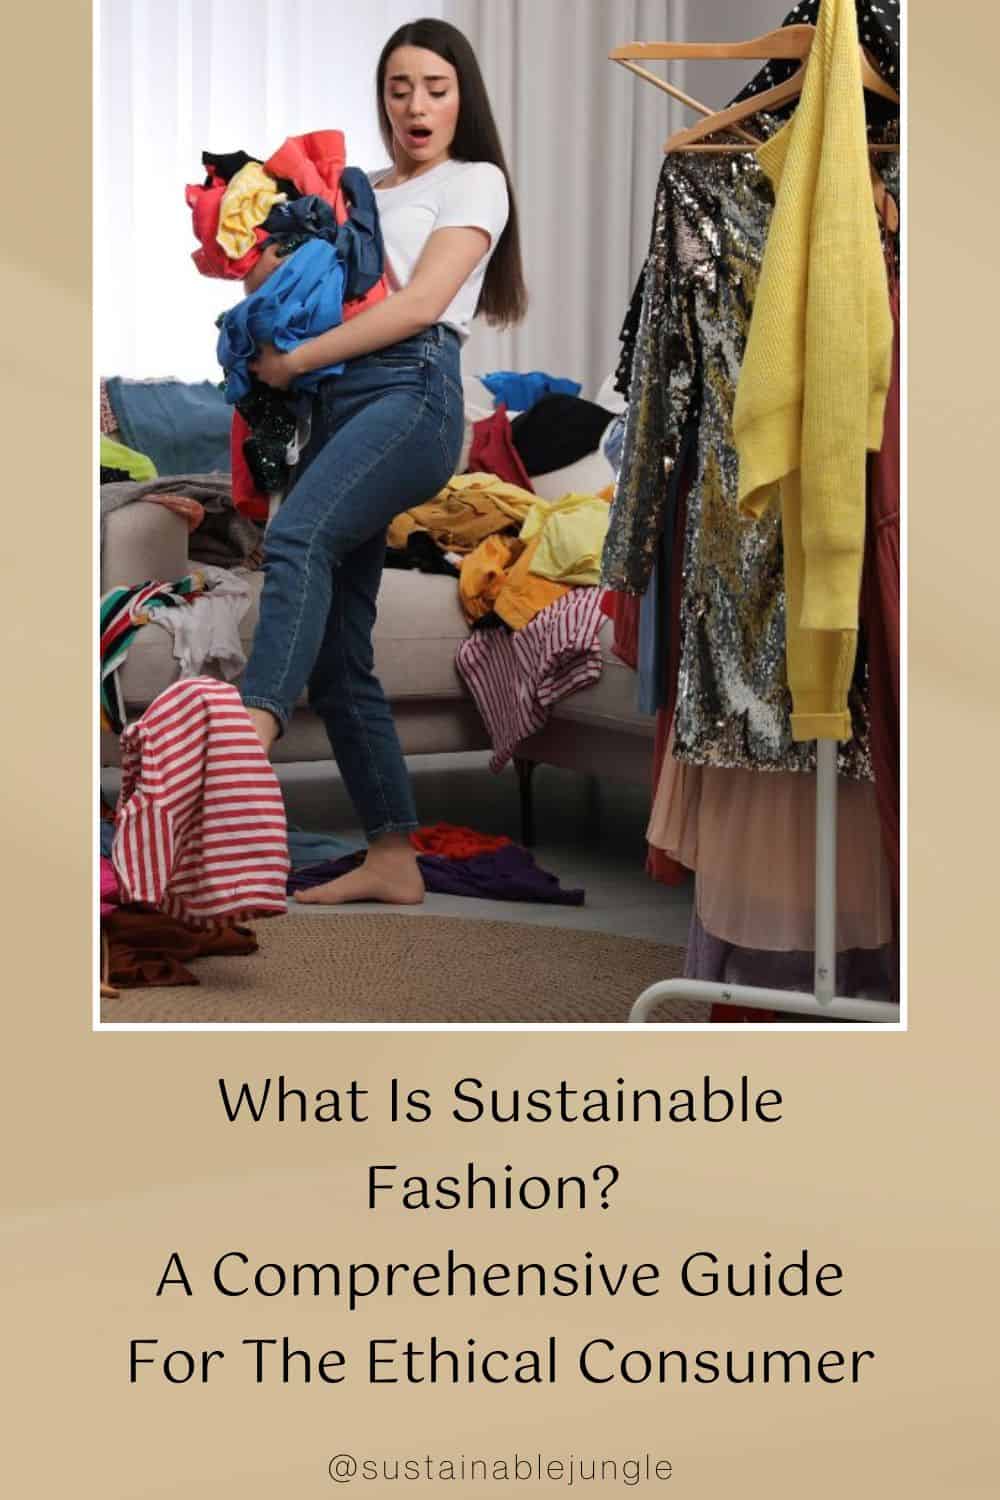 What Is Sustainable Fashion? A Comprehensive Guide For The Ethical Consumer Image by New Africa studio #whatissustainablefashion #sustainablefashion #whatissustainableandethicalfashion #sustainablefashionindustry #ethicalfashion #sustainabilityinfashion #sustainablejungle